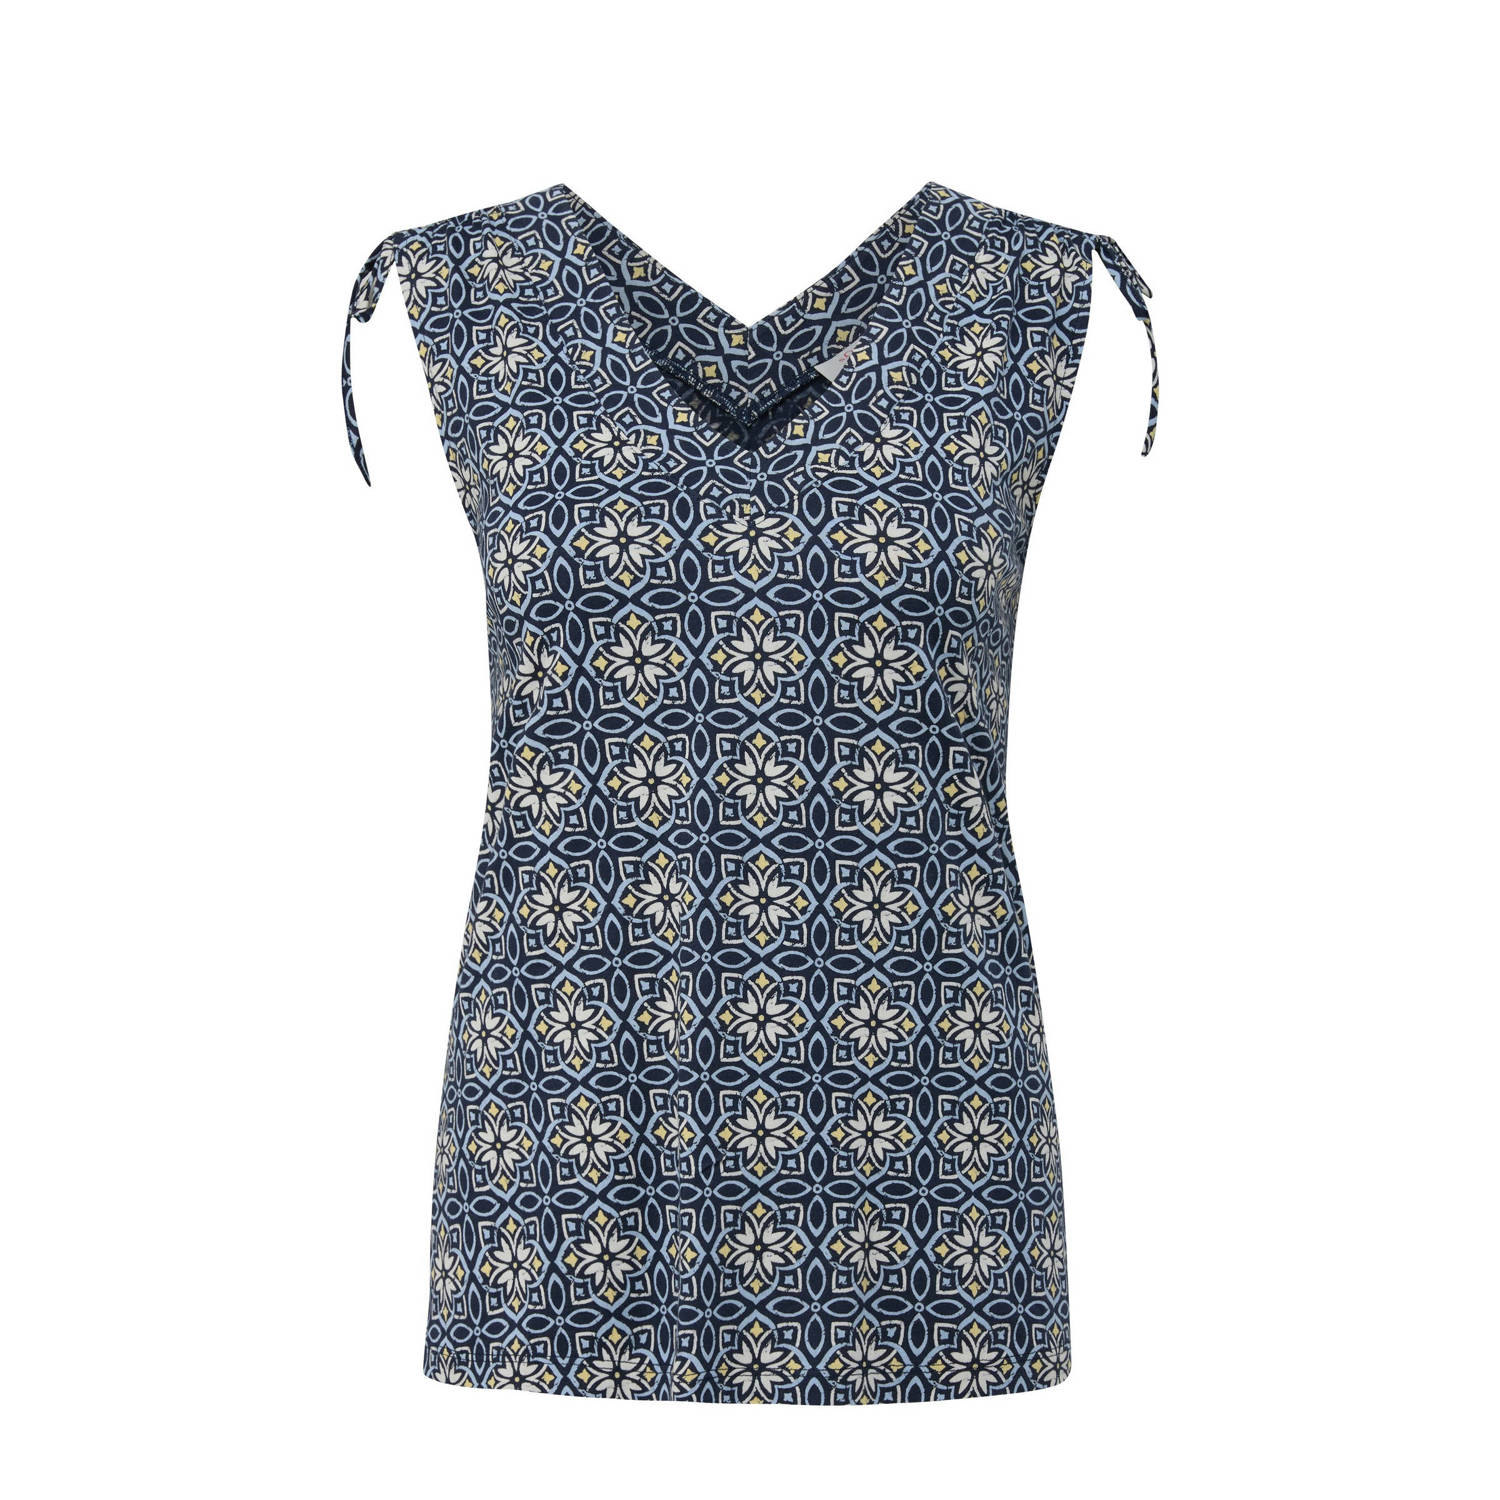 S.Oliver top donkerblauw